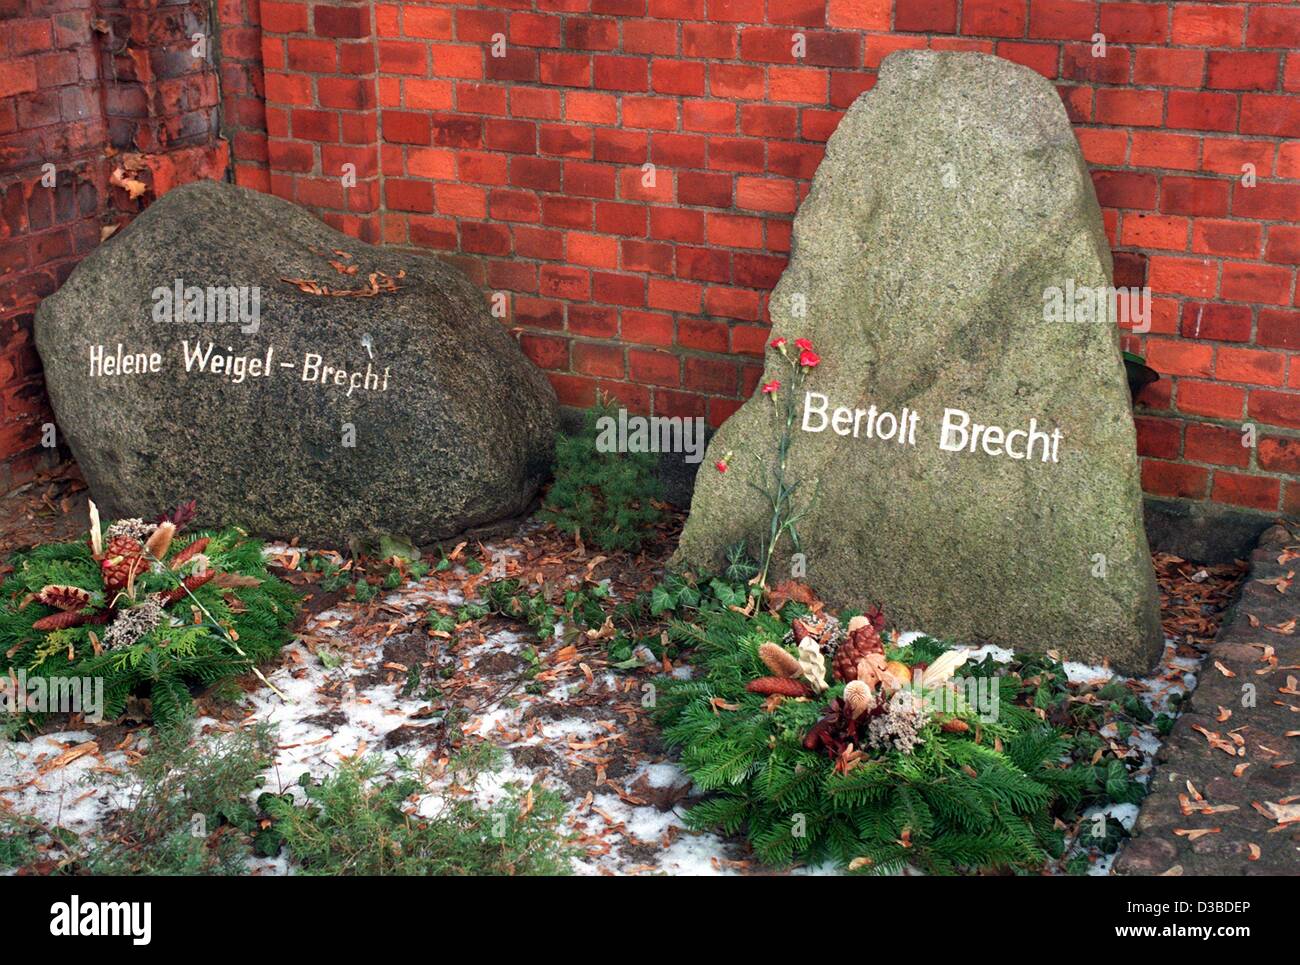 (dpa files) - The graves of German writer Bertolt Brecht (1898-1956) and his wife, actress Helene Weigel (1900-1971), on the cemetery Dorotheenstaedtischer Friedhof in Berlin, Germany, 11 January 1996. Brecht was born on 10 February 1898 in Augsburg in the Bavarian section of the German Empire, and  Stock Photo